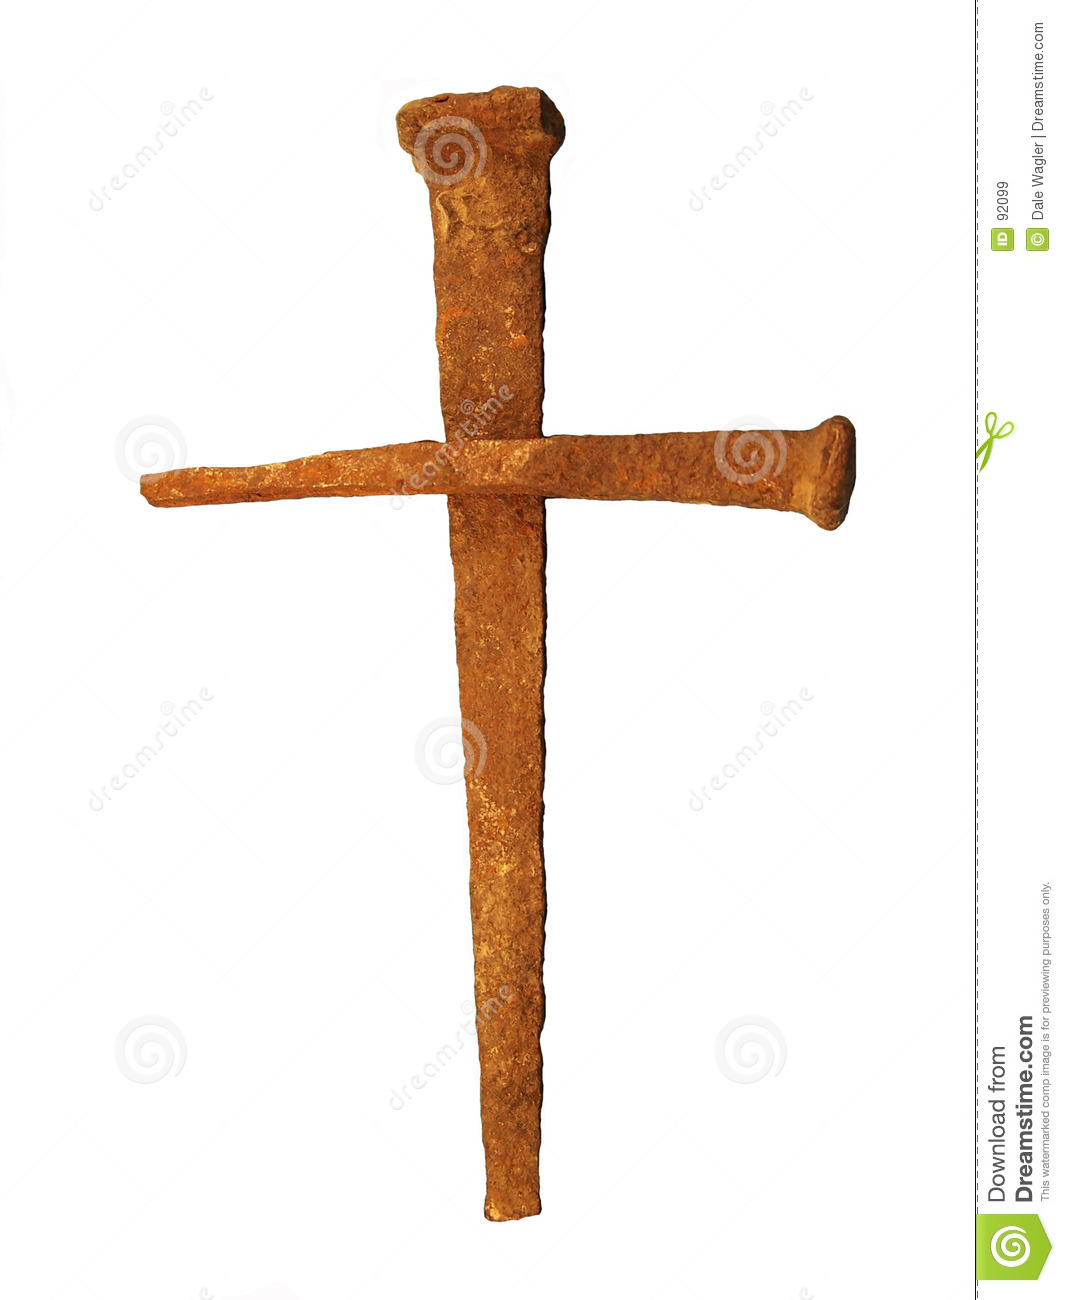 Cross Of Nails Clipart Images.